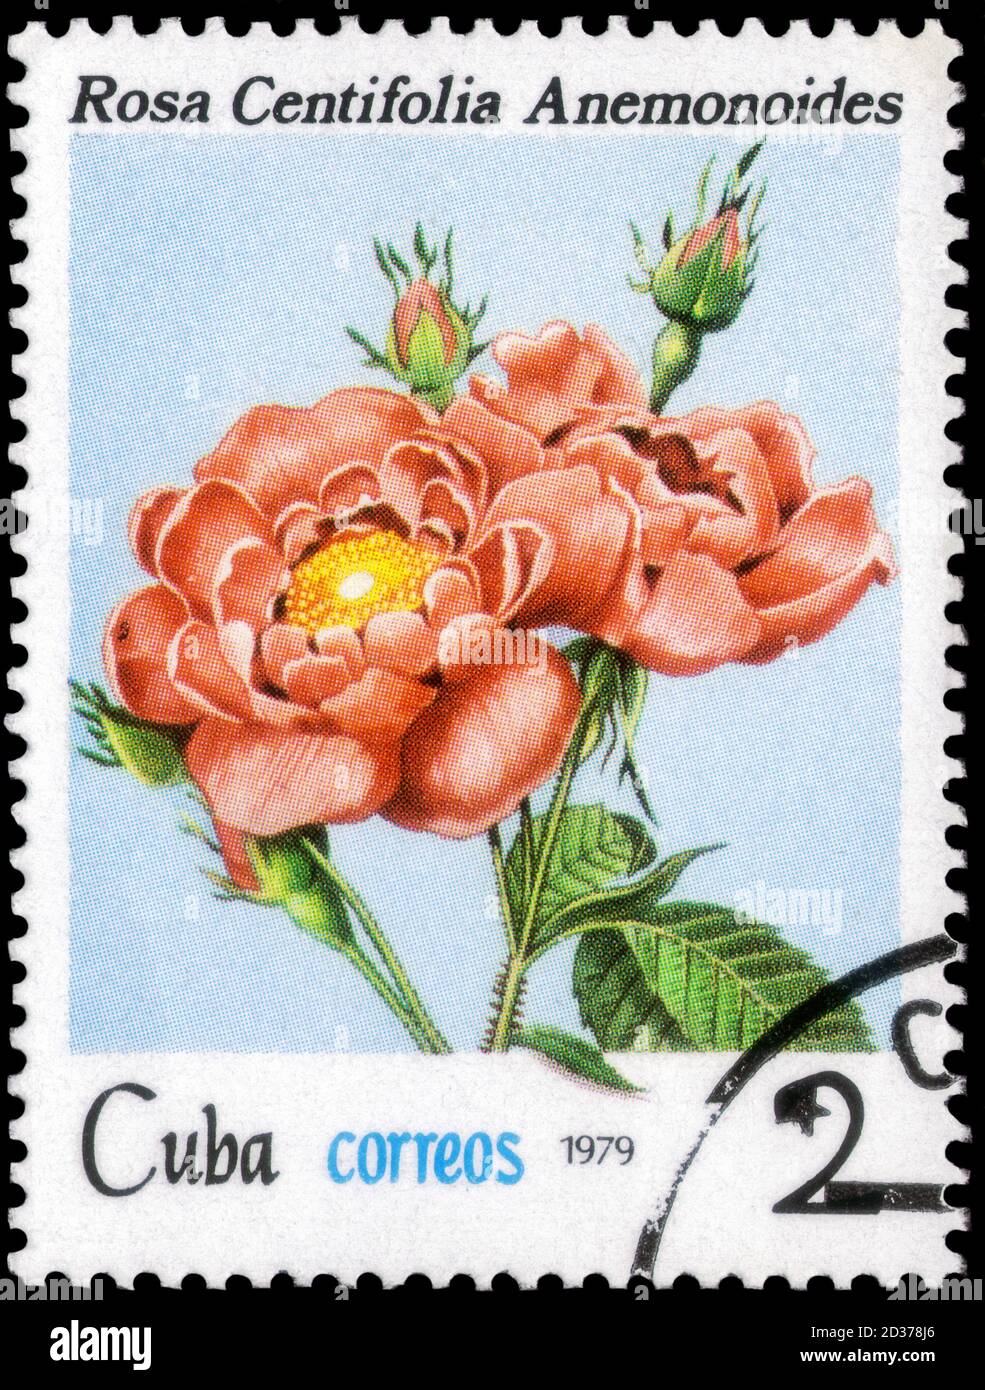 Saint Petersburg, Russia - September 18, 2020: Stamp printed in the Cuba with the image of the Rosa centifolia, circa 1979 Stock Photo